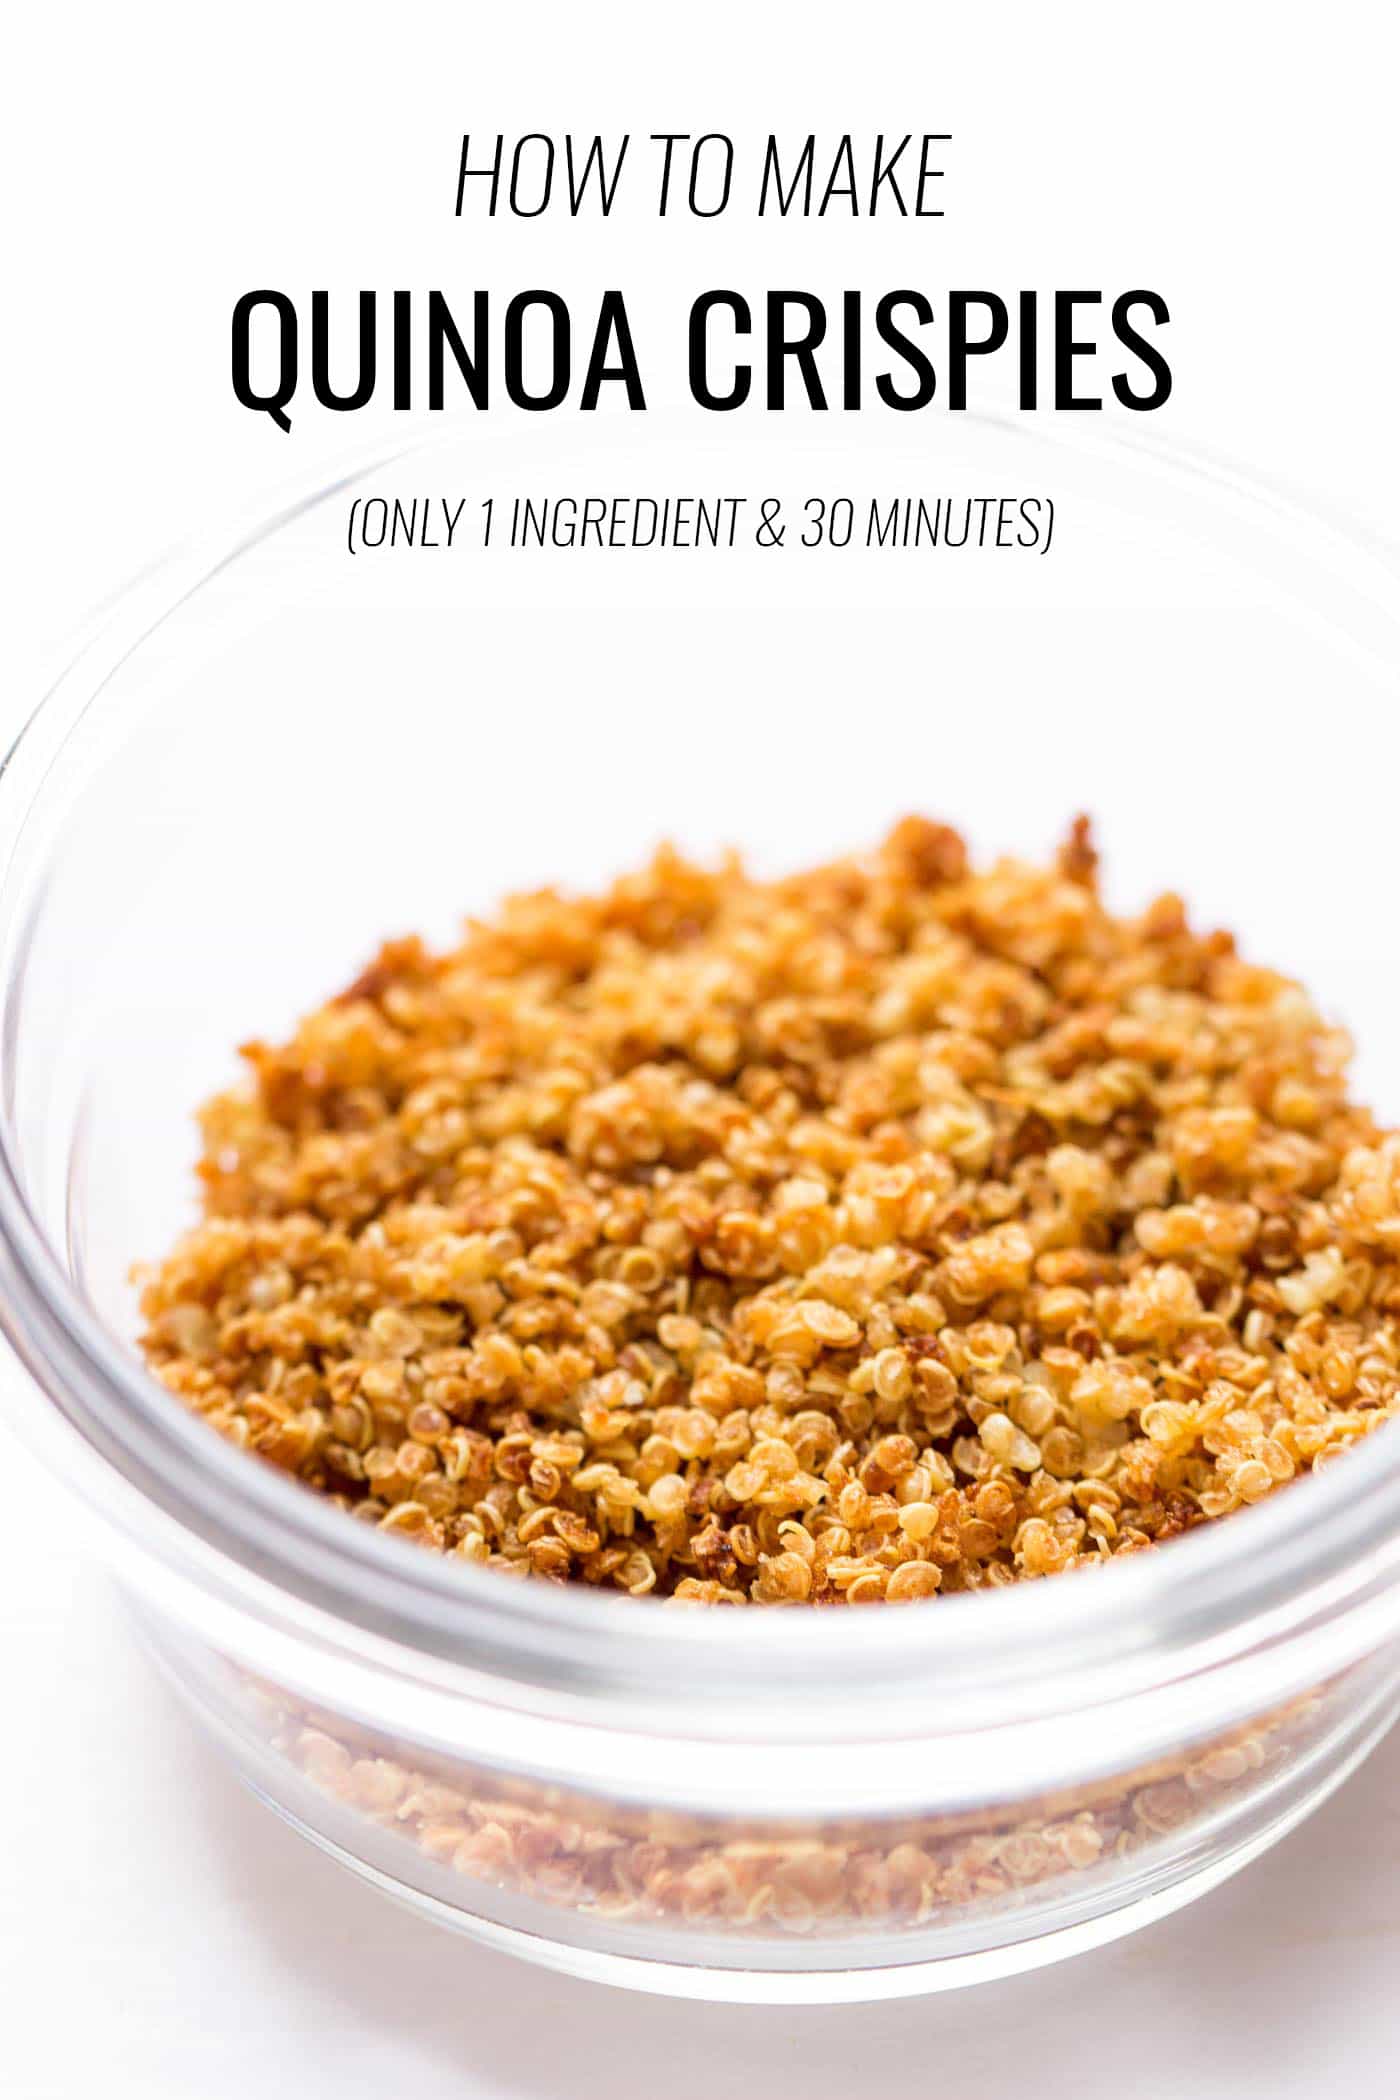 How to make QUINOA CRISPIES at home! (only need 1 ingredient and 30 minutes)